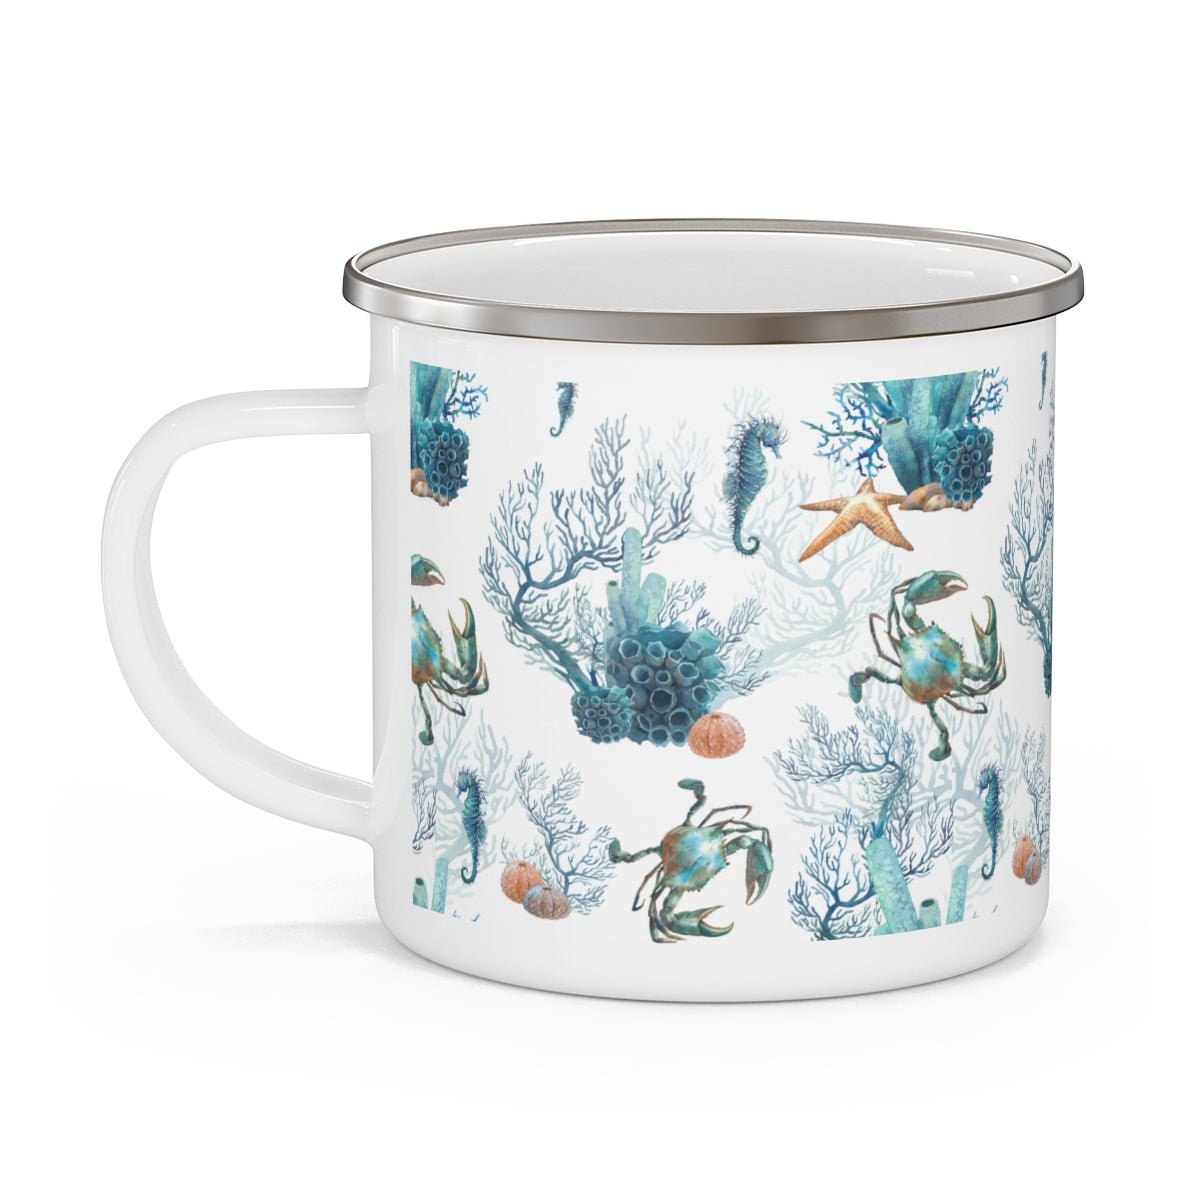 Watercolor Coral Reef Stainless Steel Camping Mug - Puffin Lime